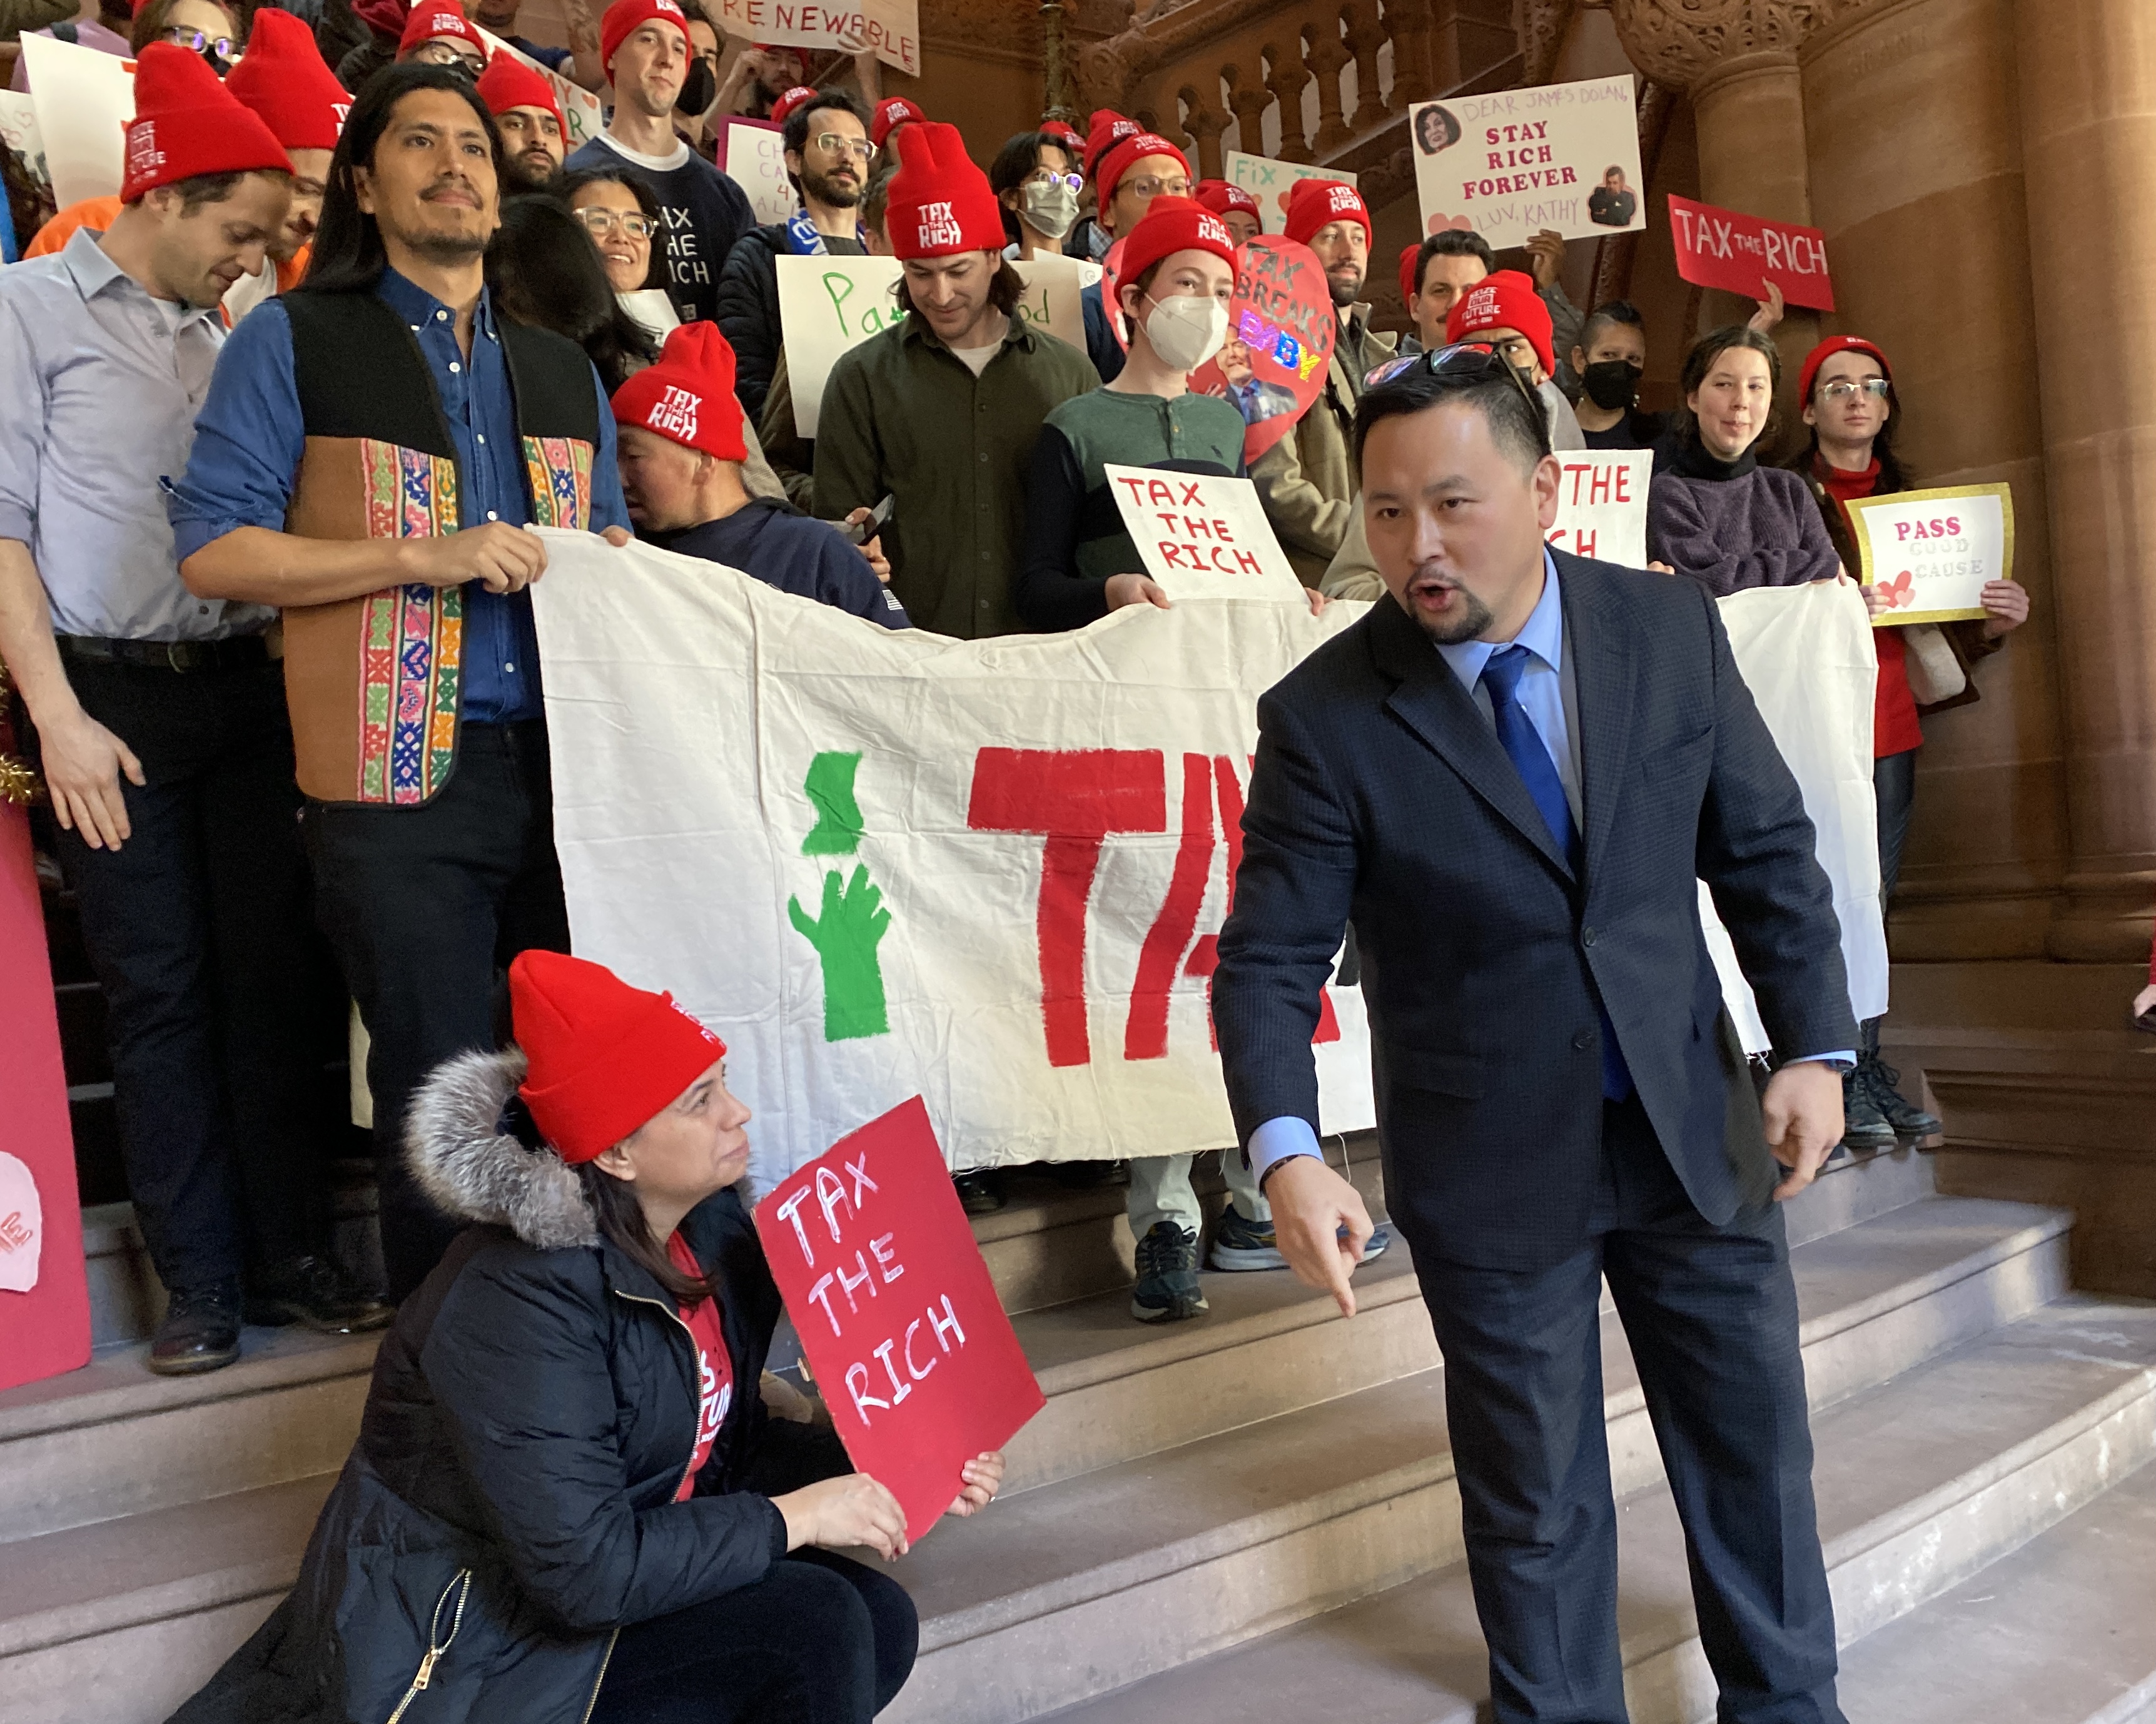 Assemblymember Ron Kim, D-Queens, speaks at a Tax the Rich rally at the state Capitol in Albany.